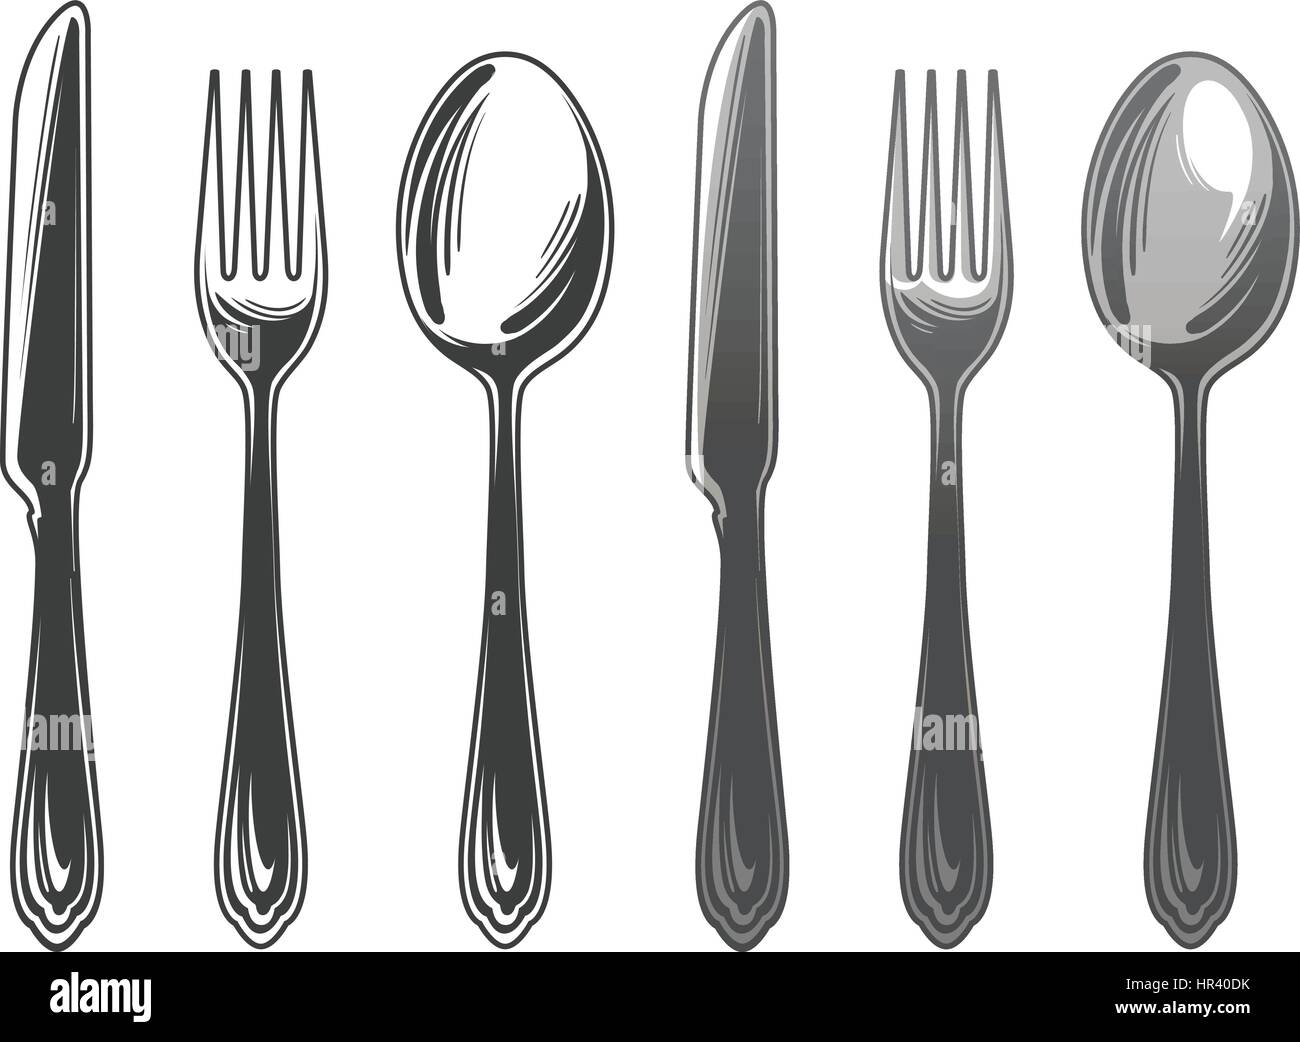 Cutlery set spoon, fork and knife. Tableware, top view. Vector illustration Stock Vector